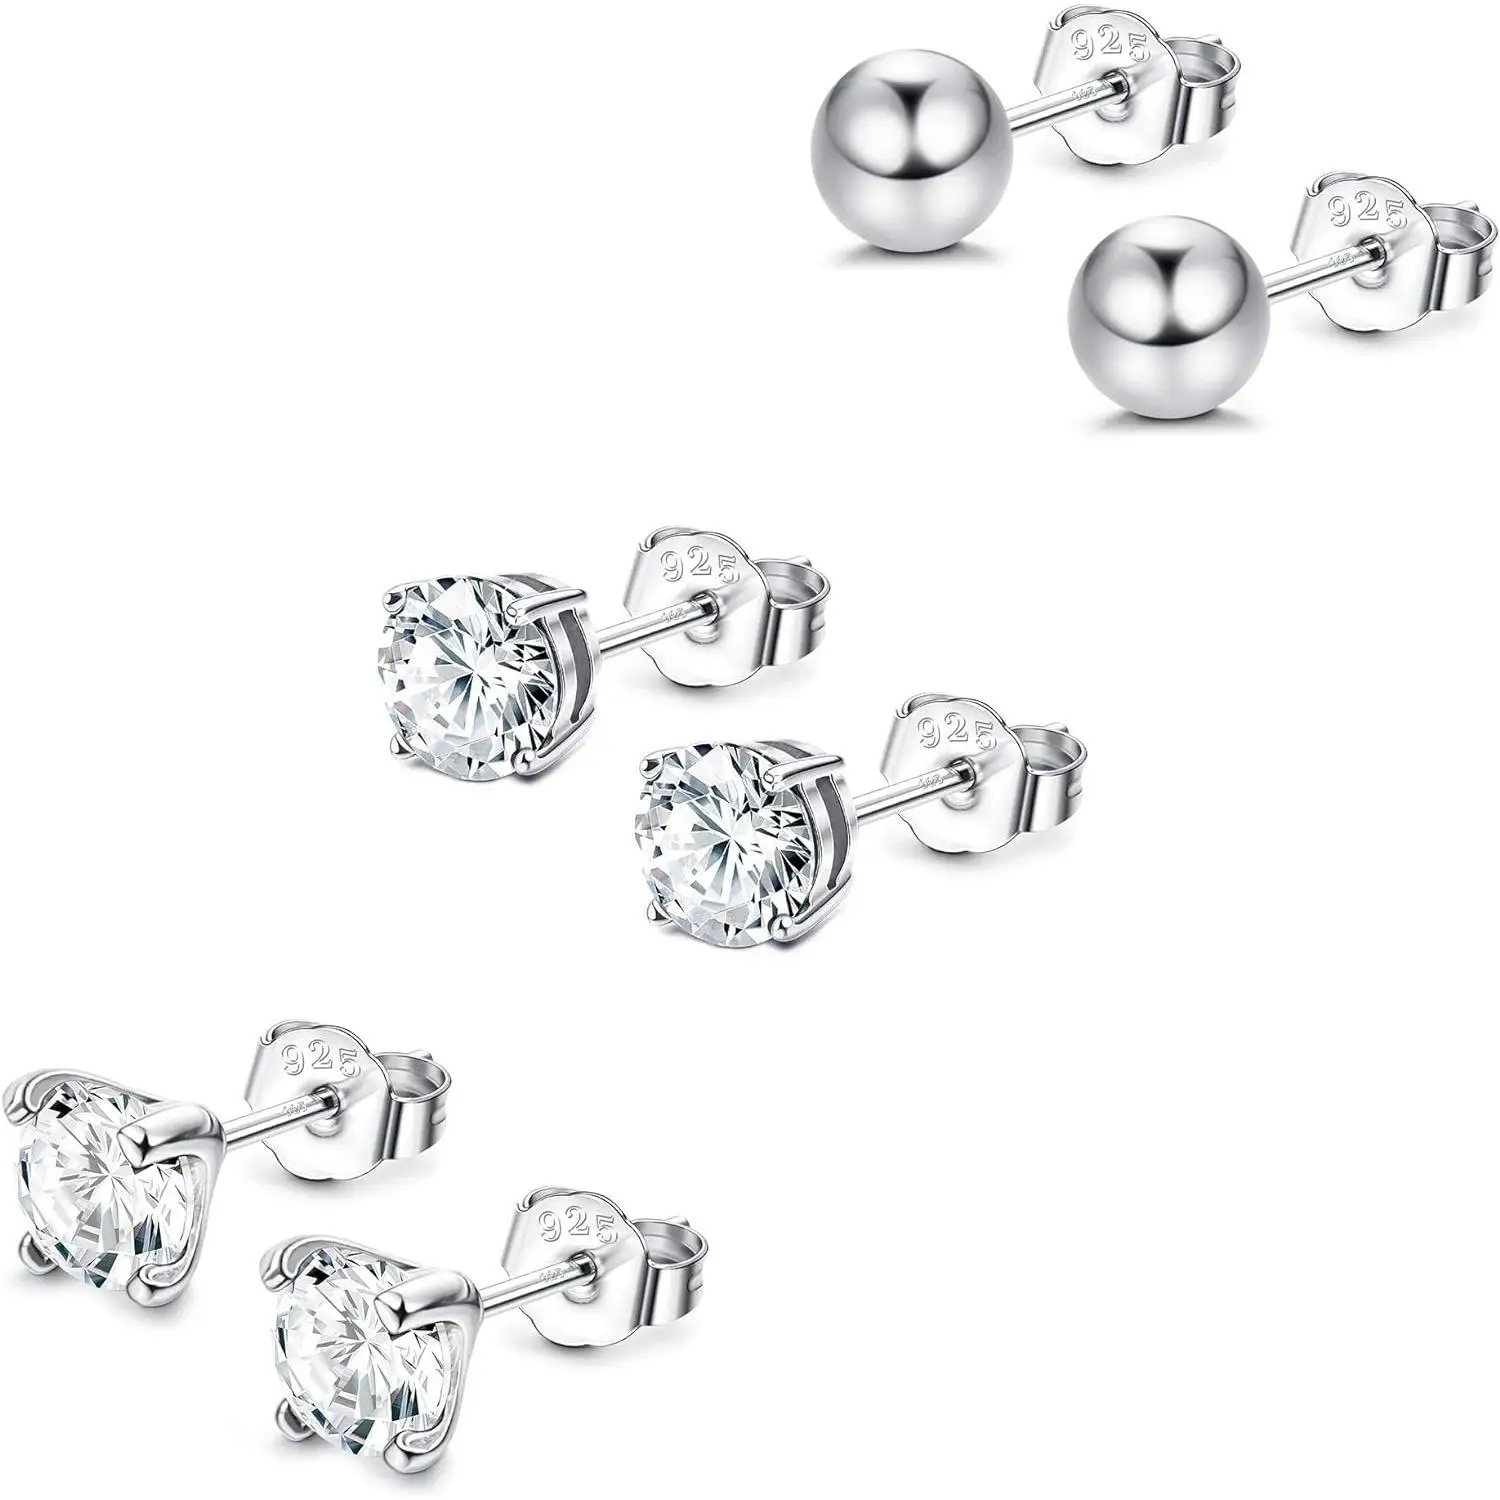 

Fansilver 3 Pairs 925 Sterling Silver Cubic Zirconia Stud Earrings Tiny Studs 18k White Gold Plated Ball Earring Studs